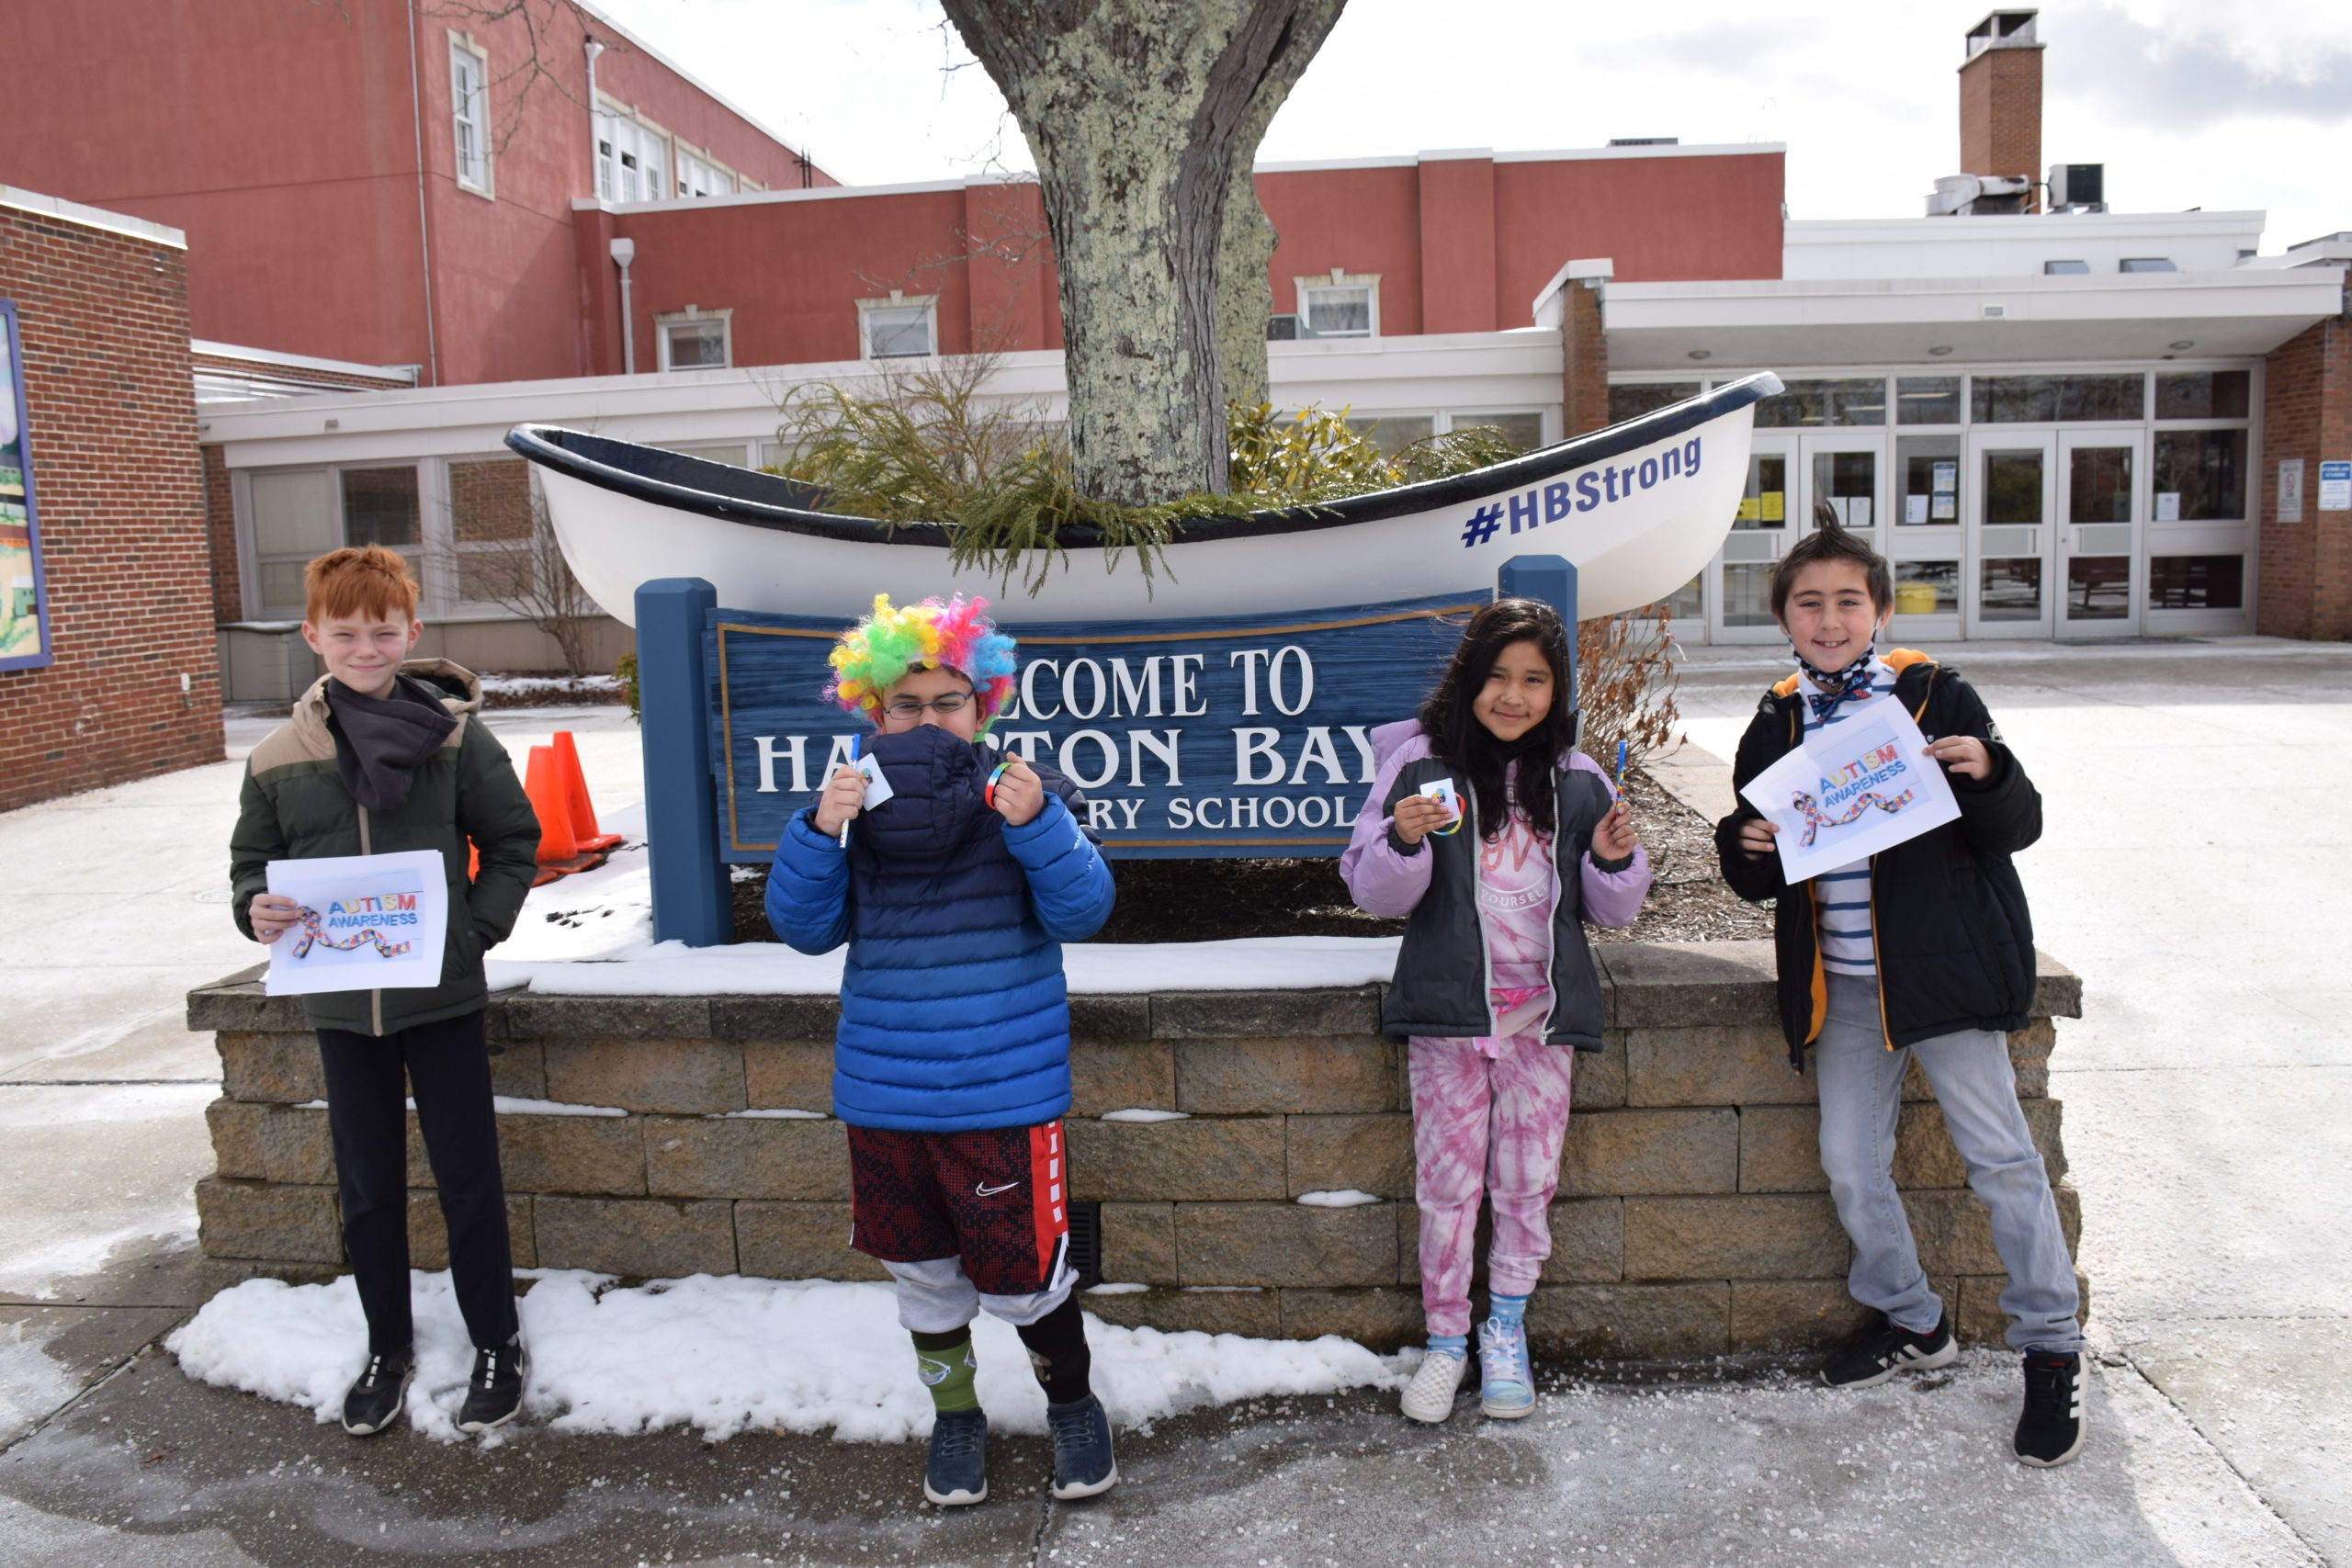 Members of Hampton Bays Elementary School’s service club, K-Kids, recently raised $200 for Camp Flying Point in Southampton as part of an annual autism awareness fundraiser. For the fundraiser, the club sold autism awareness bracelets during their lunch periods throughout the week of February 14.